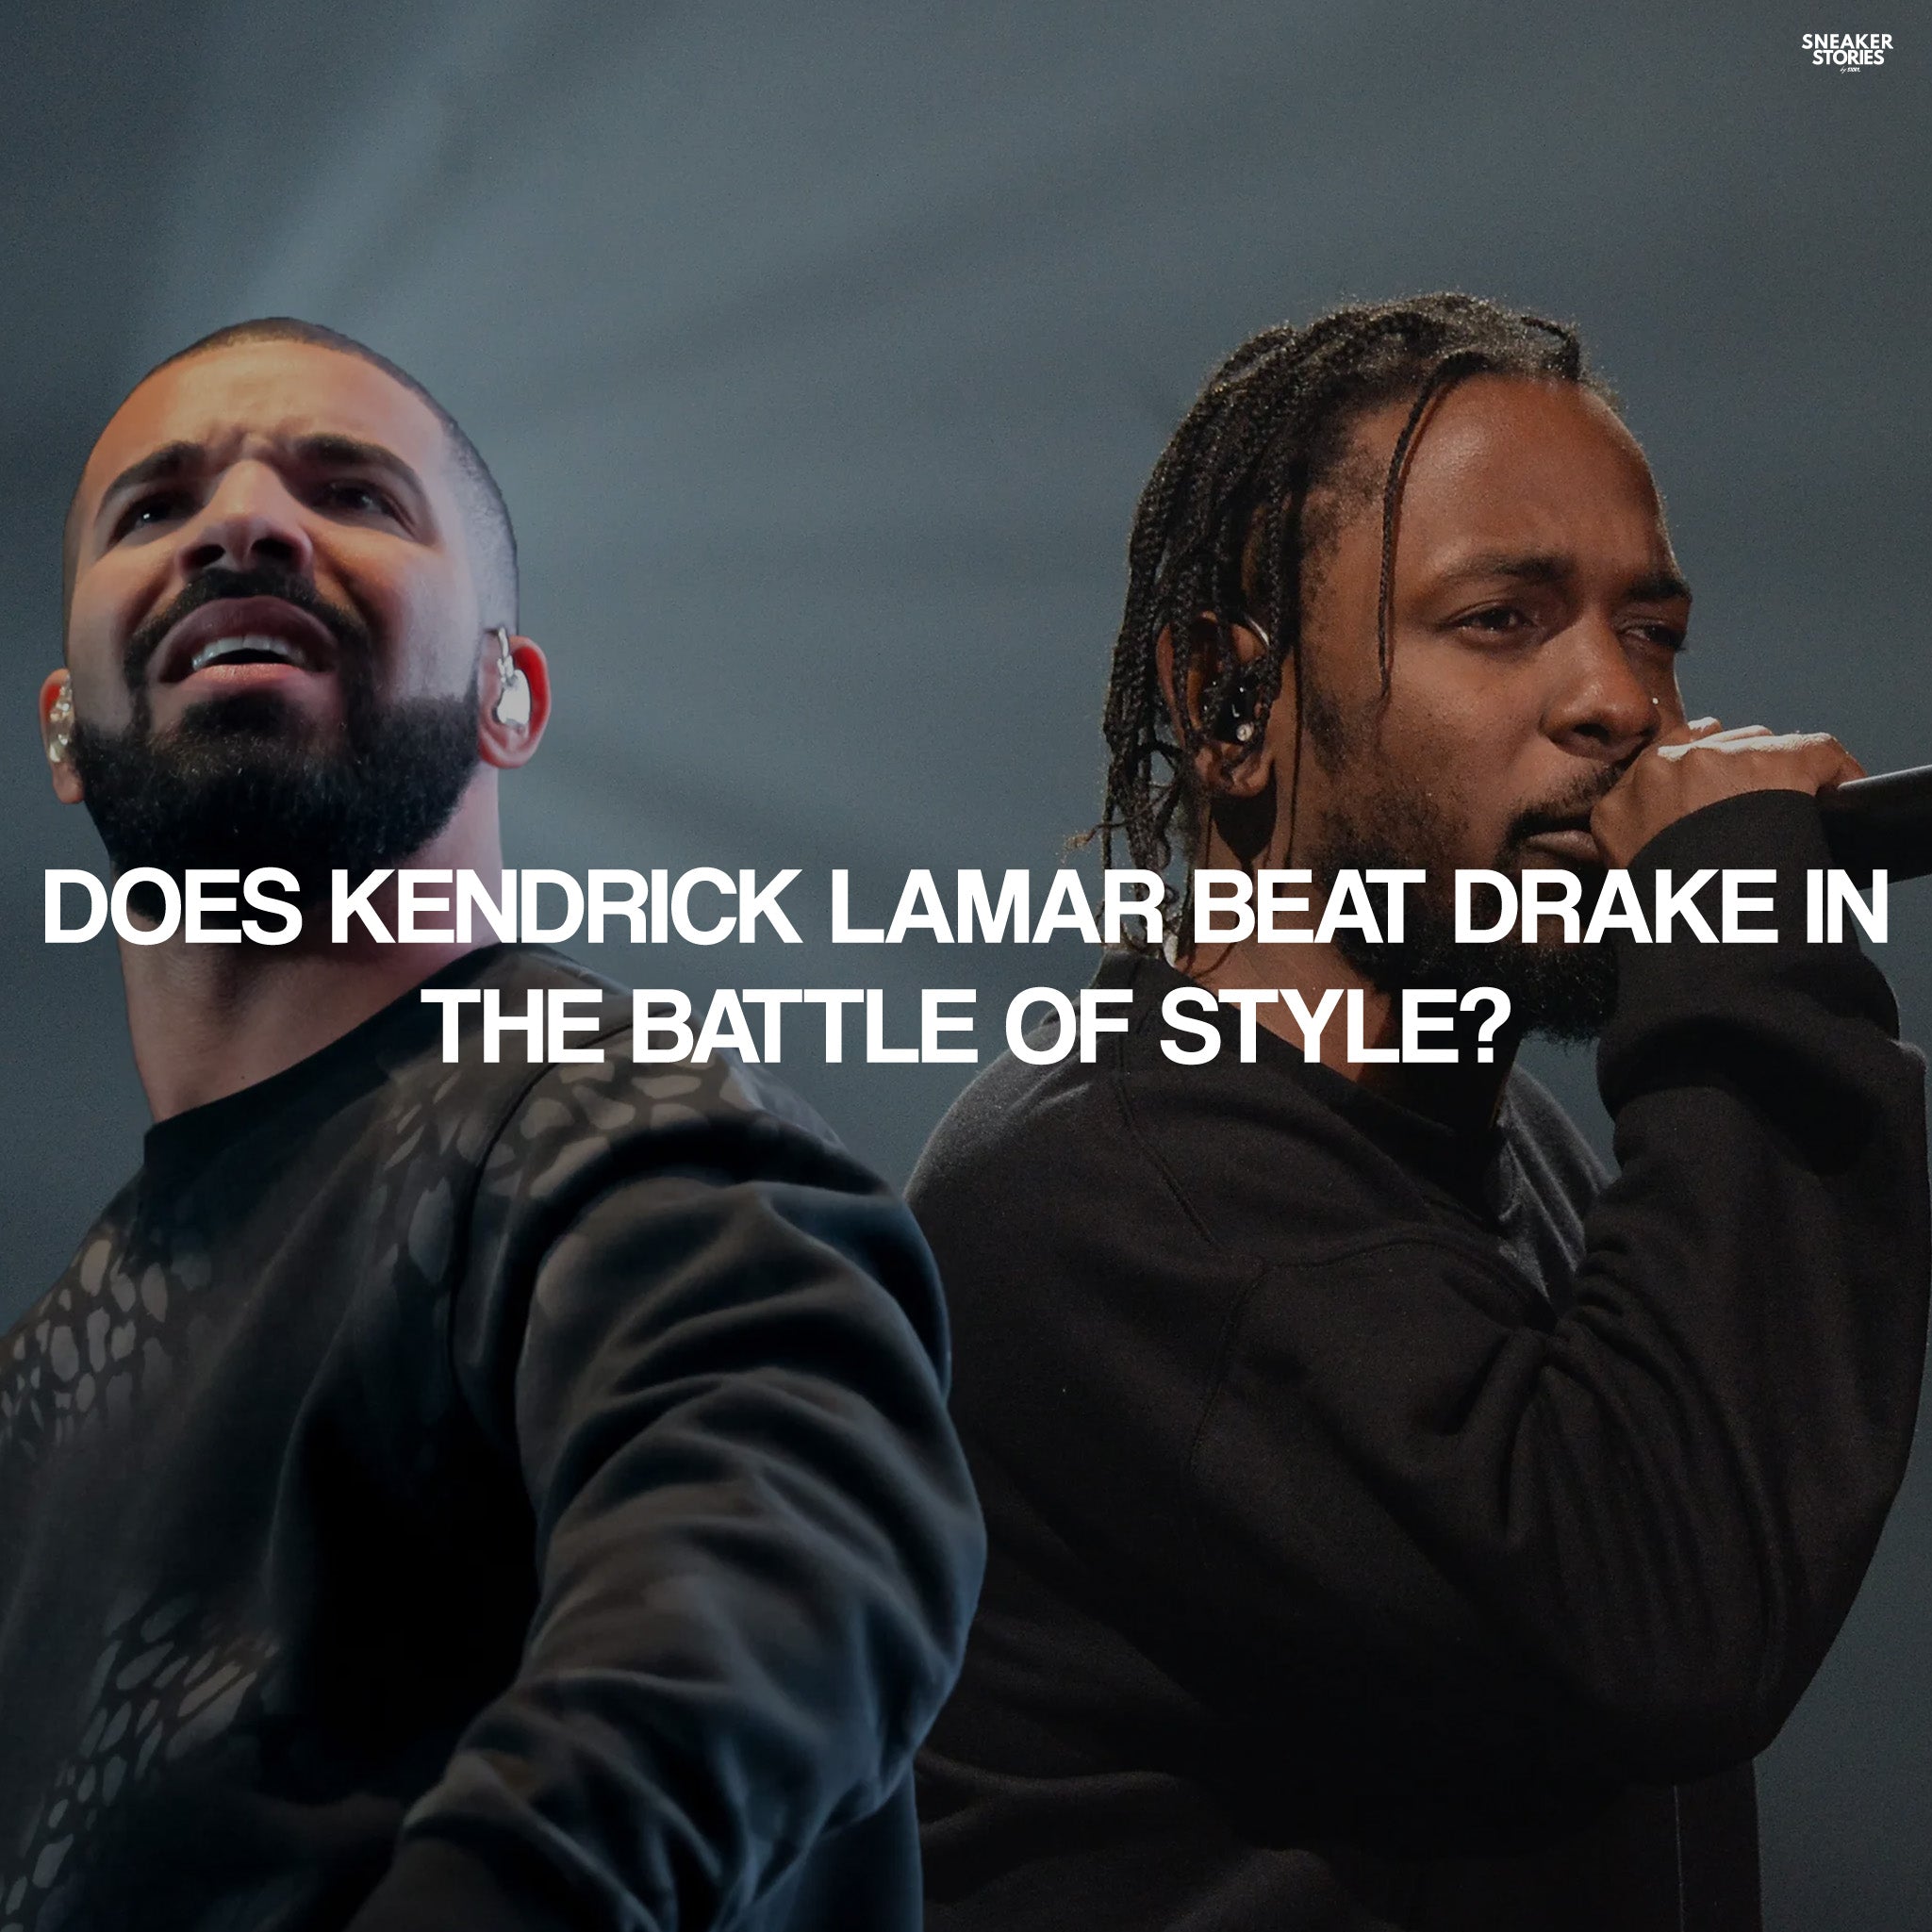 Does Kendrick Lamar beat Drake in the battle of style?